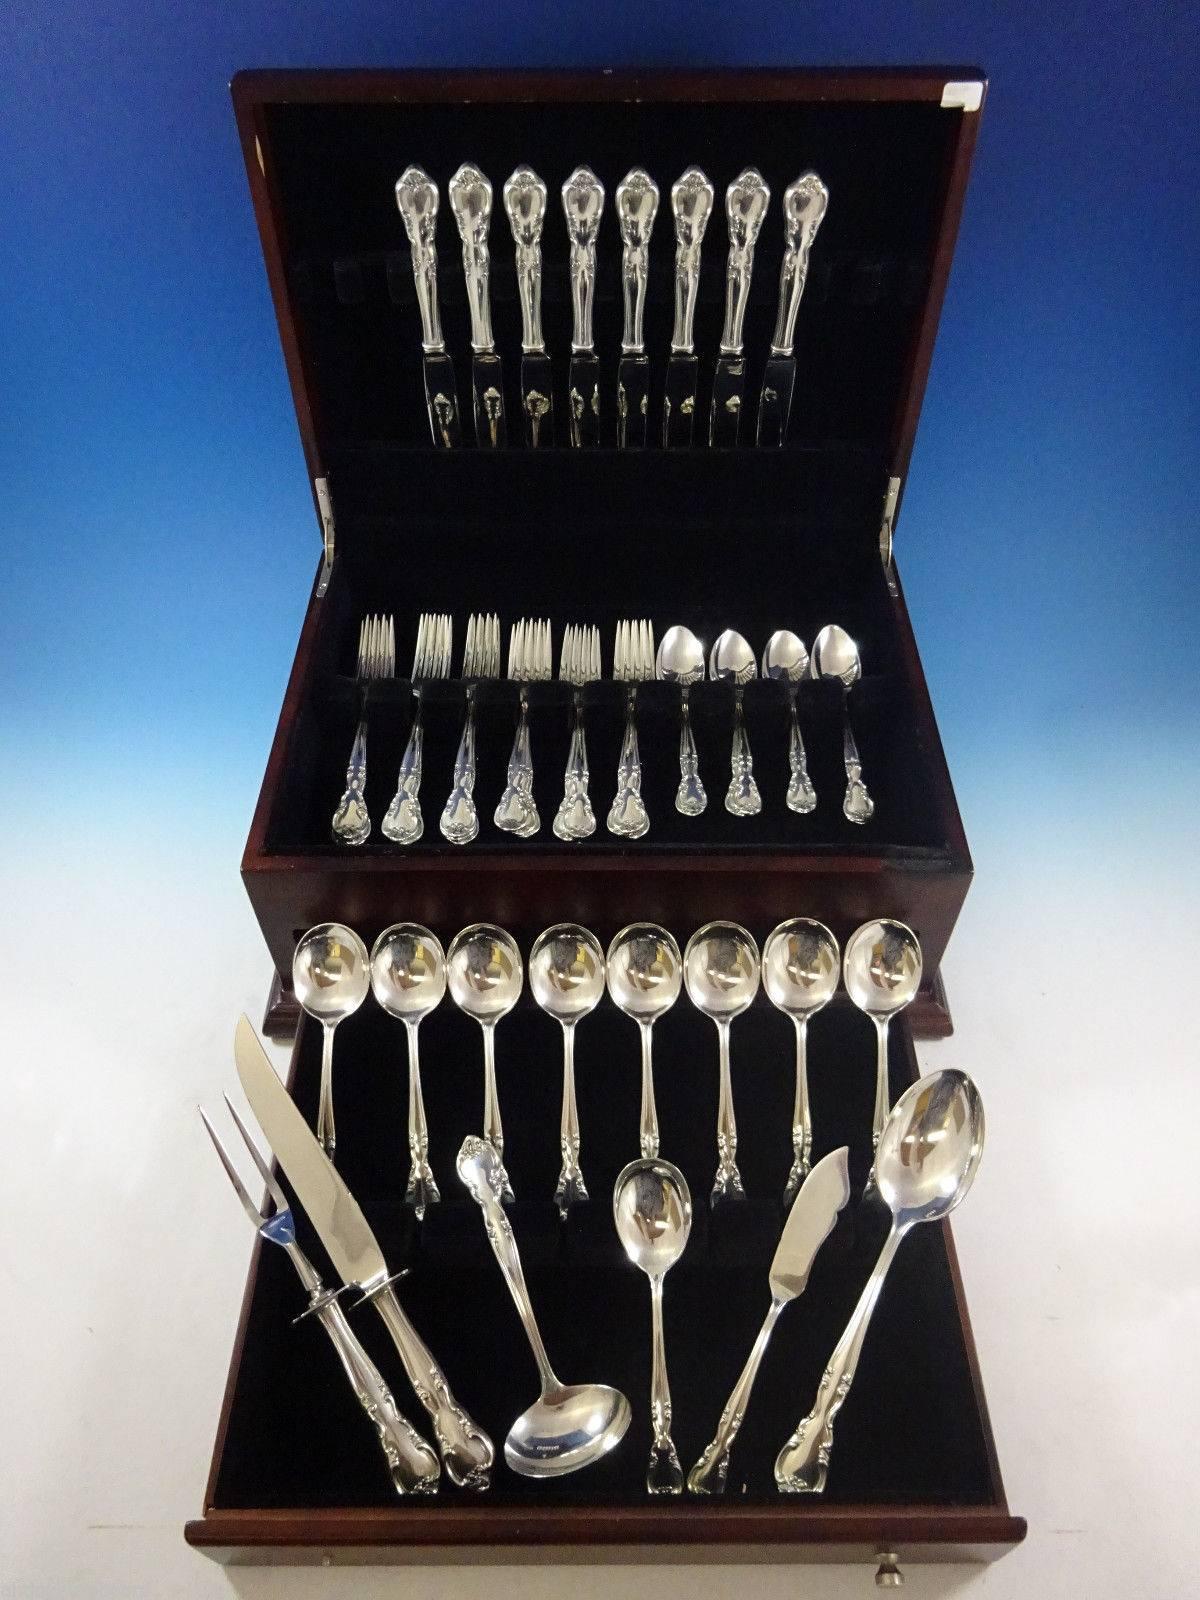 American classic by Easterling sterling silver flatware set, 46 pieces. This set includes: 

Eight knives, 8 7/8